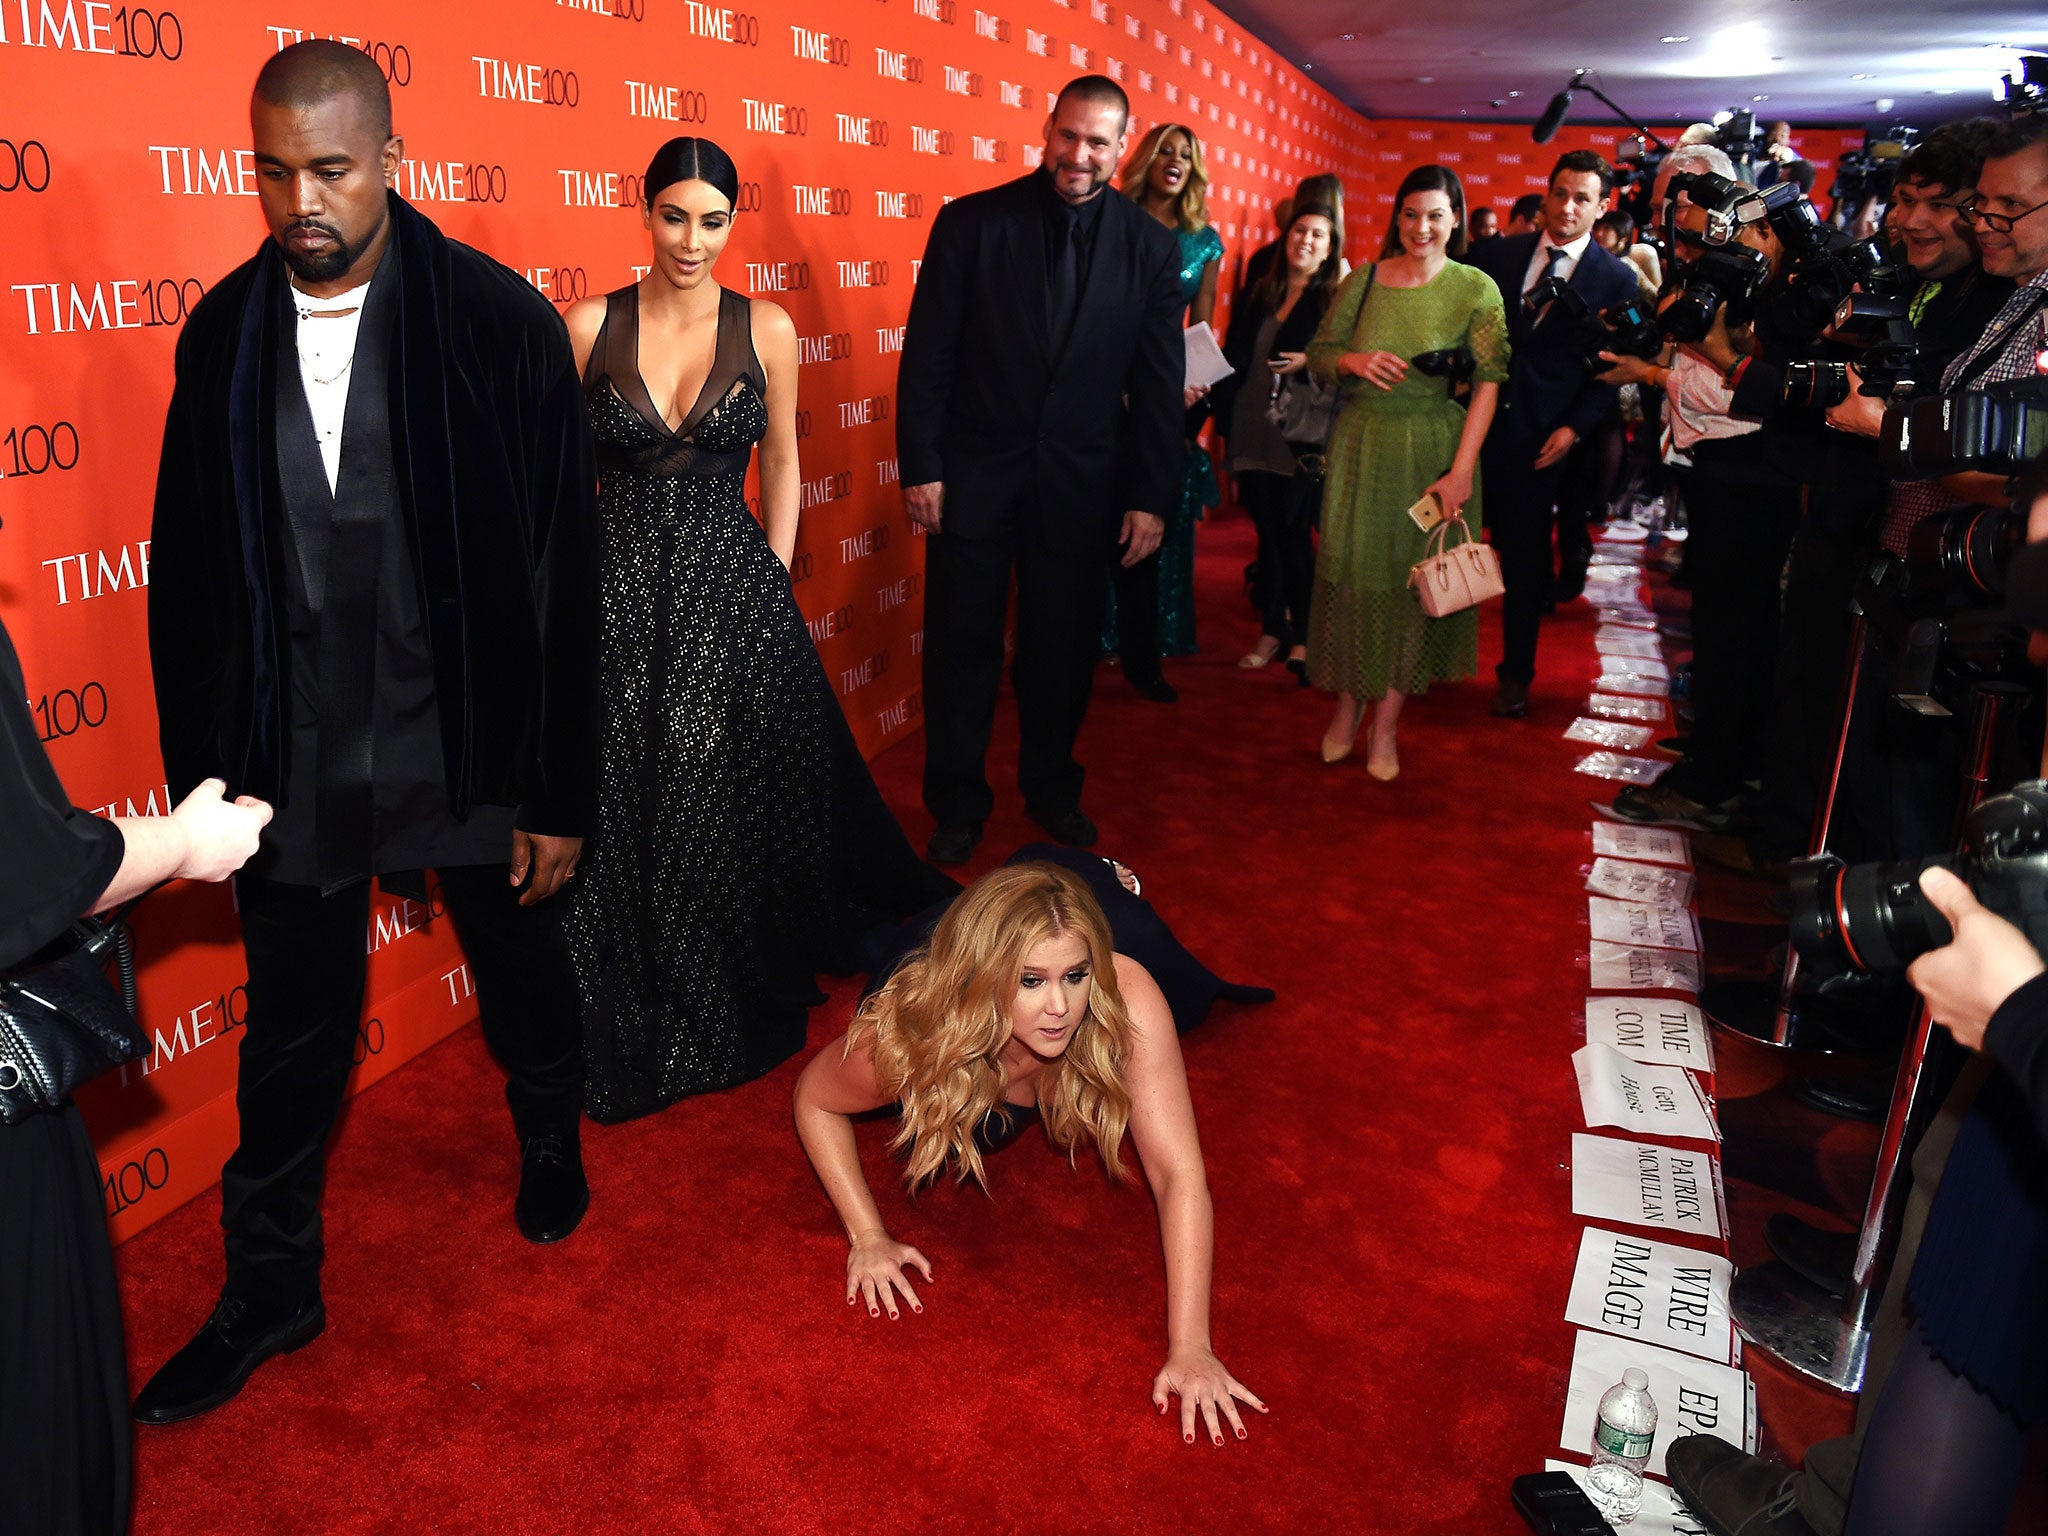 Honoree and Comedian Amy Schumer pretends to trip and fall on the floor in front of honorees Kim Kardashian and Kanye West as they attend the Time 100 Gala celebrating the Time 100 issue of the Most Influential People at The World at Jazz at Lincoln Center in New York